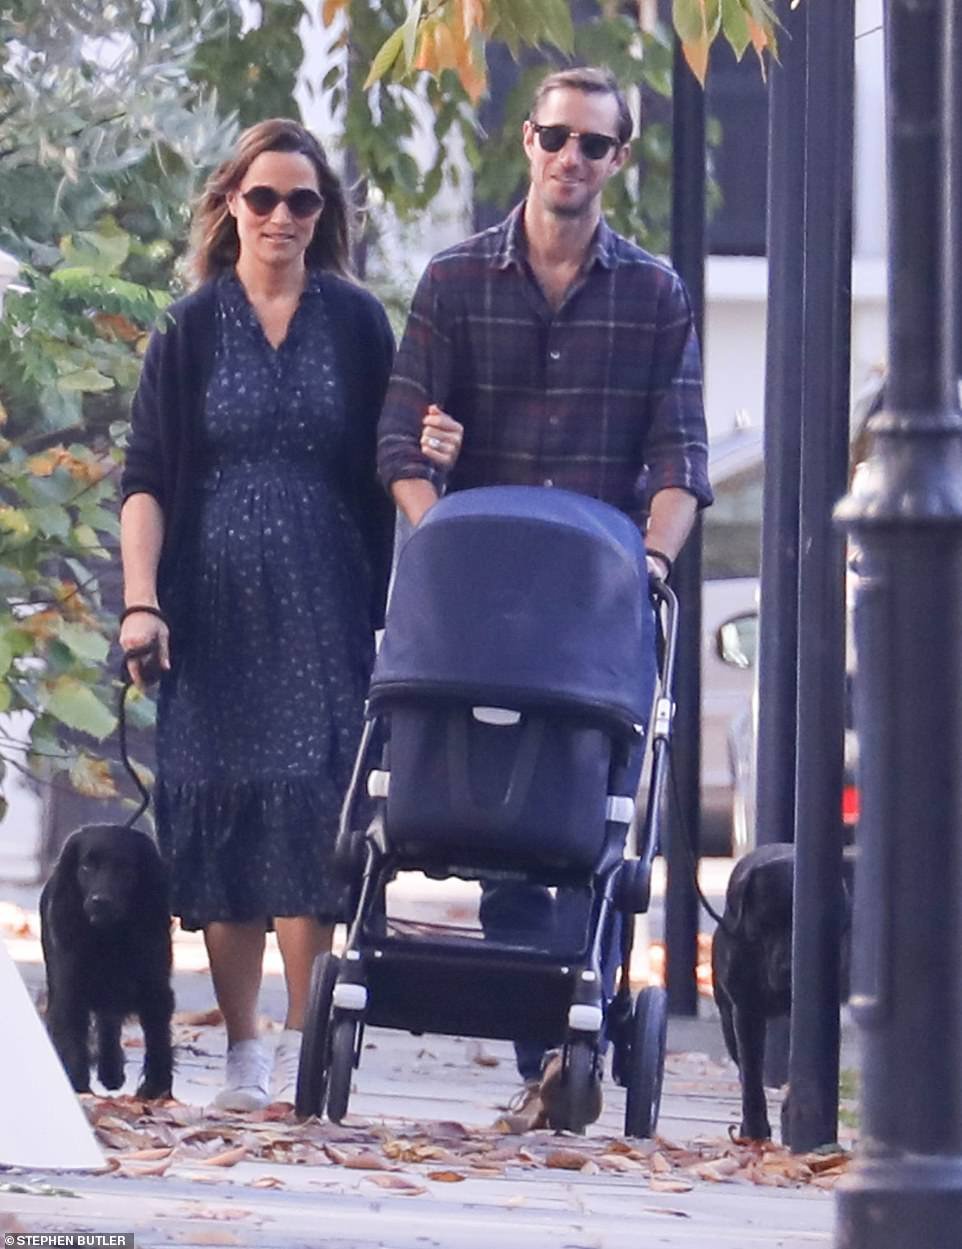 Proud parents Pippa Middleton and James Matthews have been seen for the first time with their newborn son. New father James, 43, pushed their six-day-old baby boy in a pram as they headed out for a stroll near their Â£17million west London home on Sunday, pictured